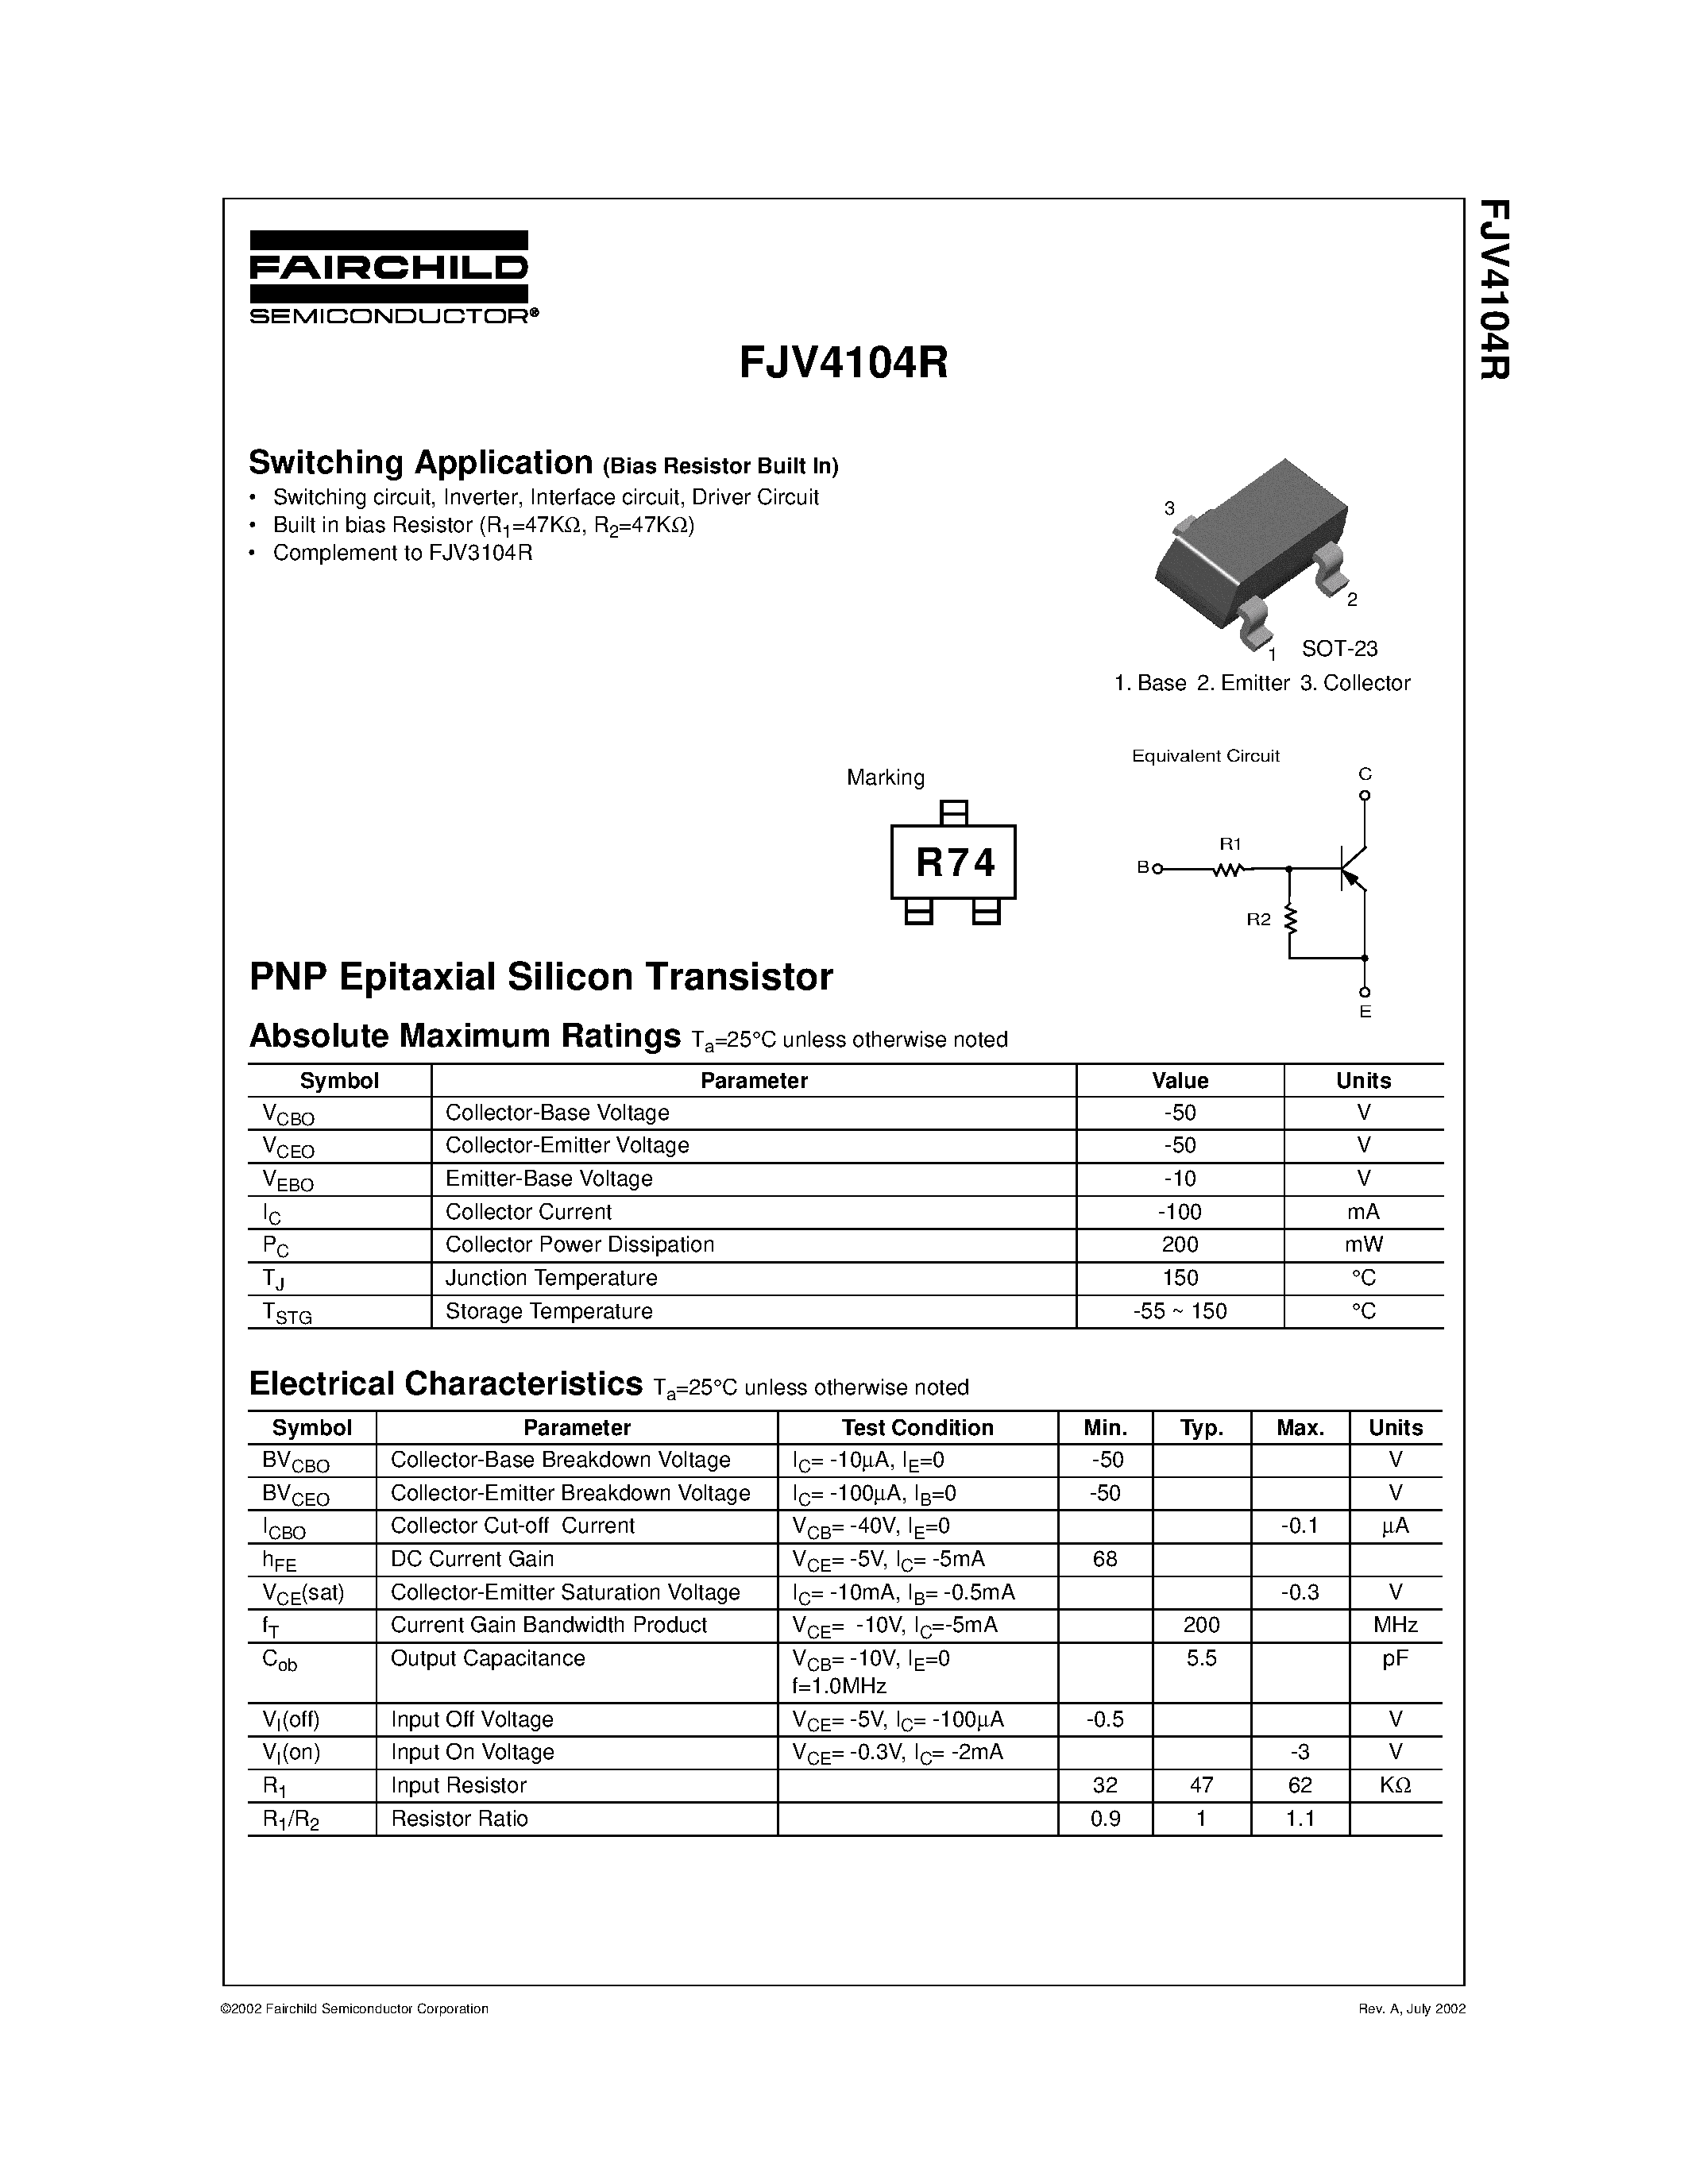 Даташит FJV4104R - PNP Epitaxial Silicon Transistor страница 1